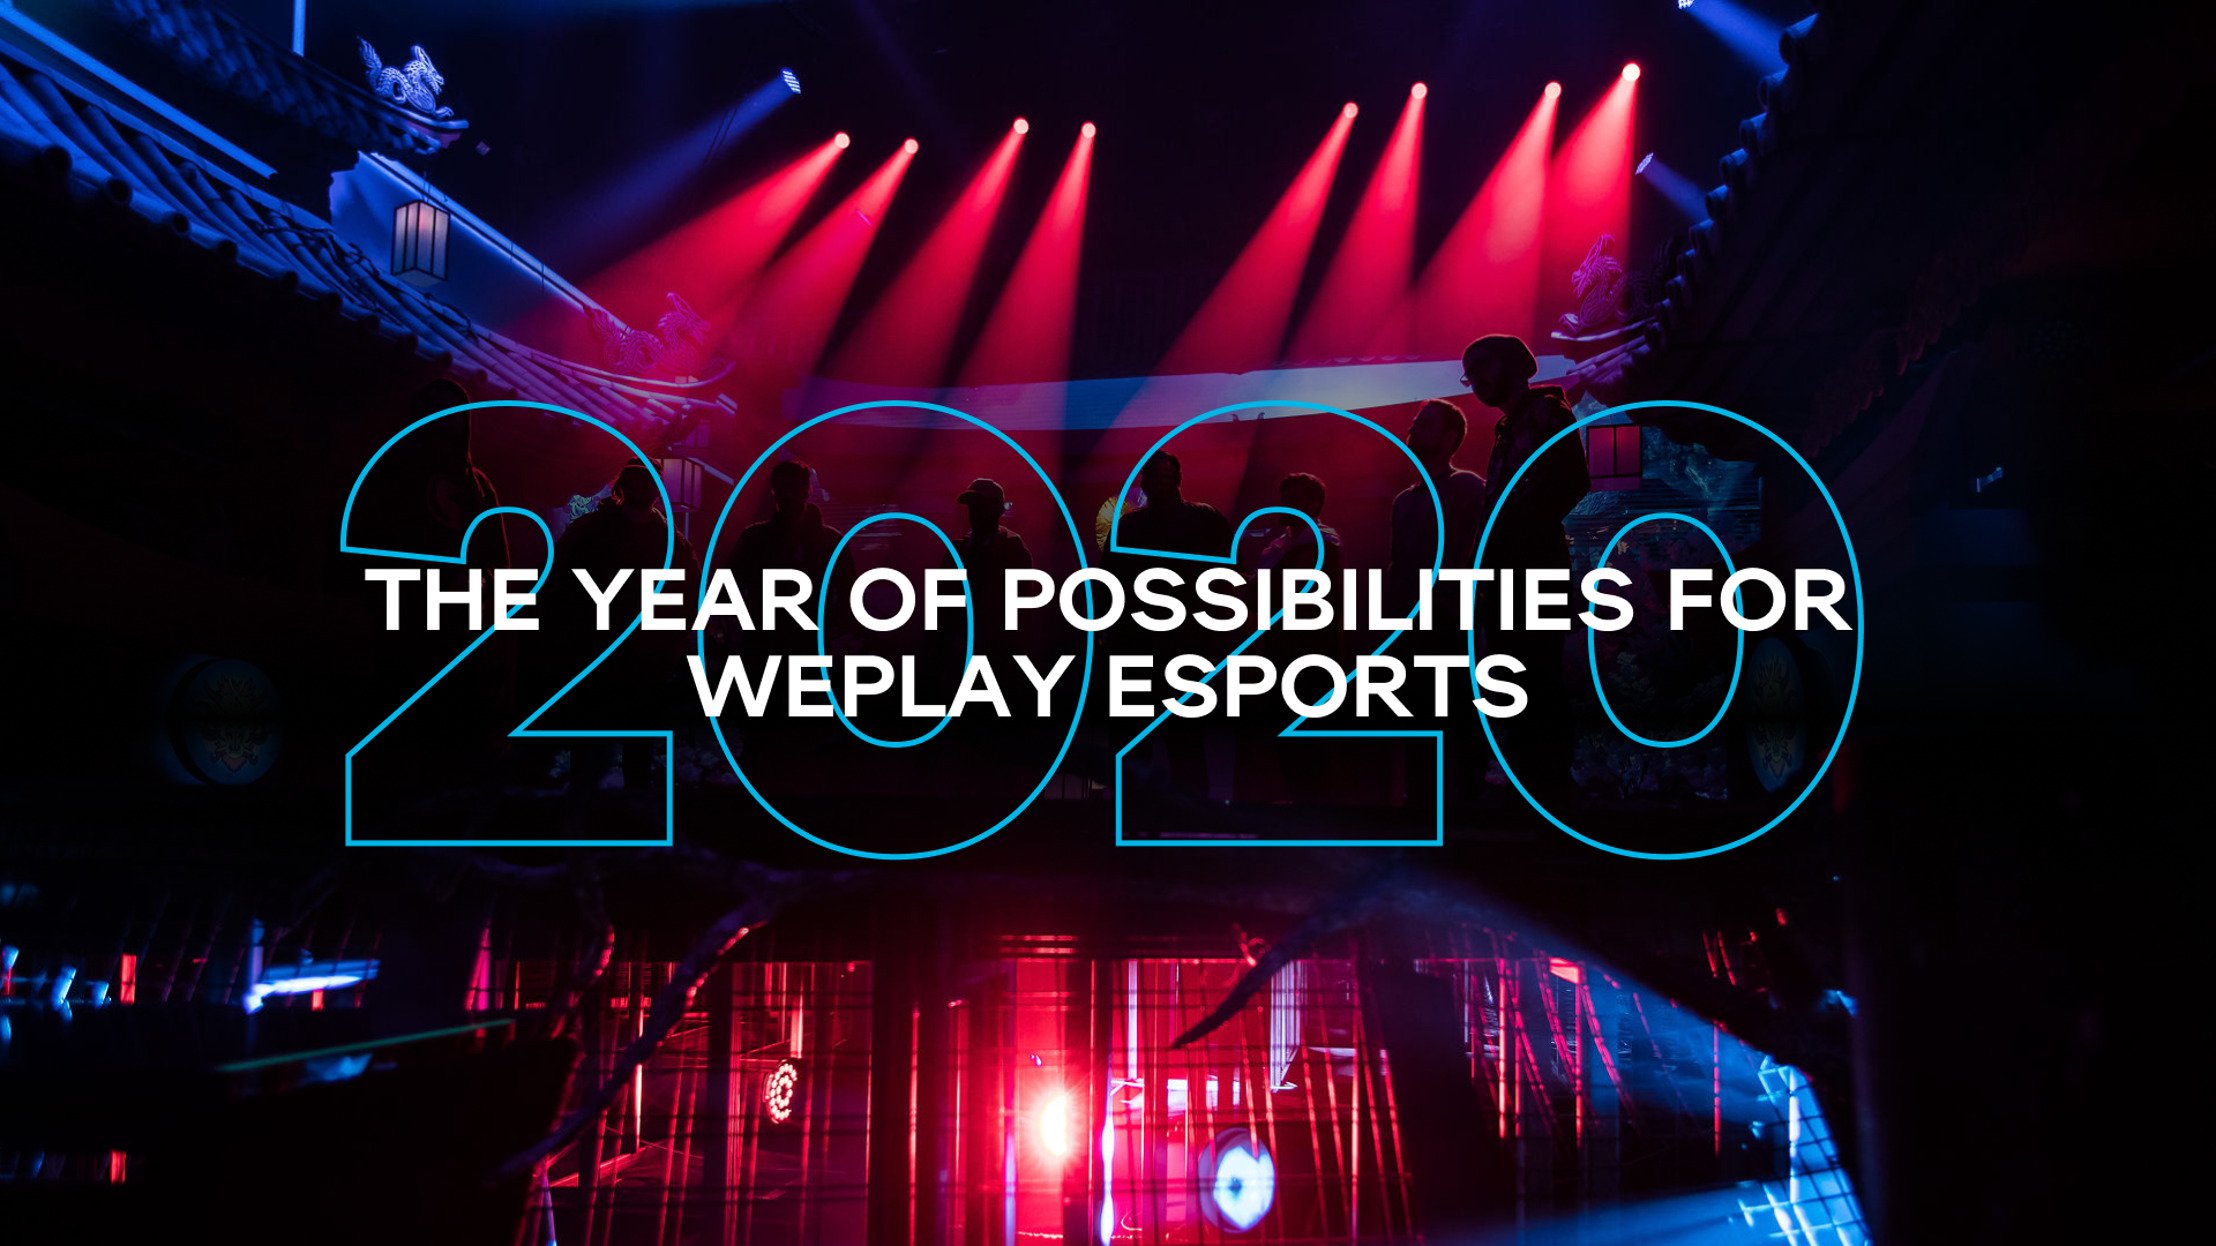 2020 Was the Year of Possibilities for WePlay Esports